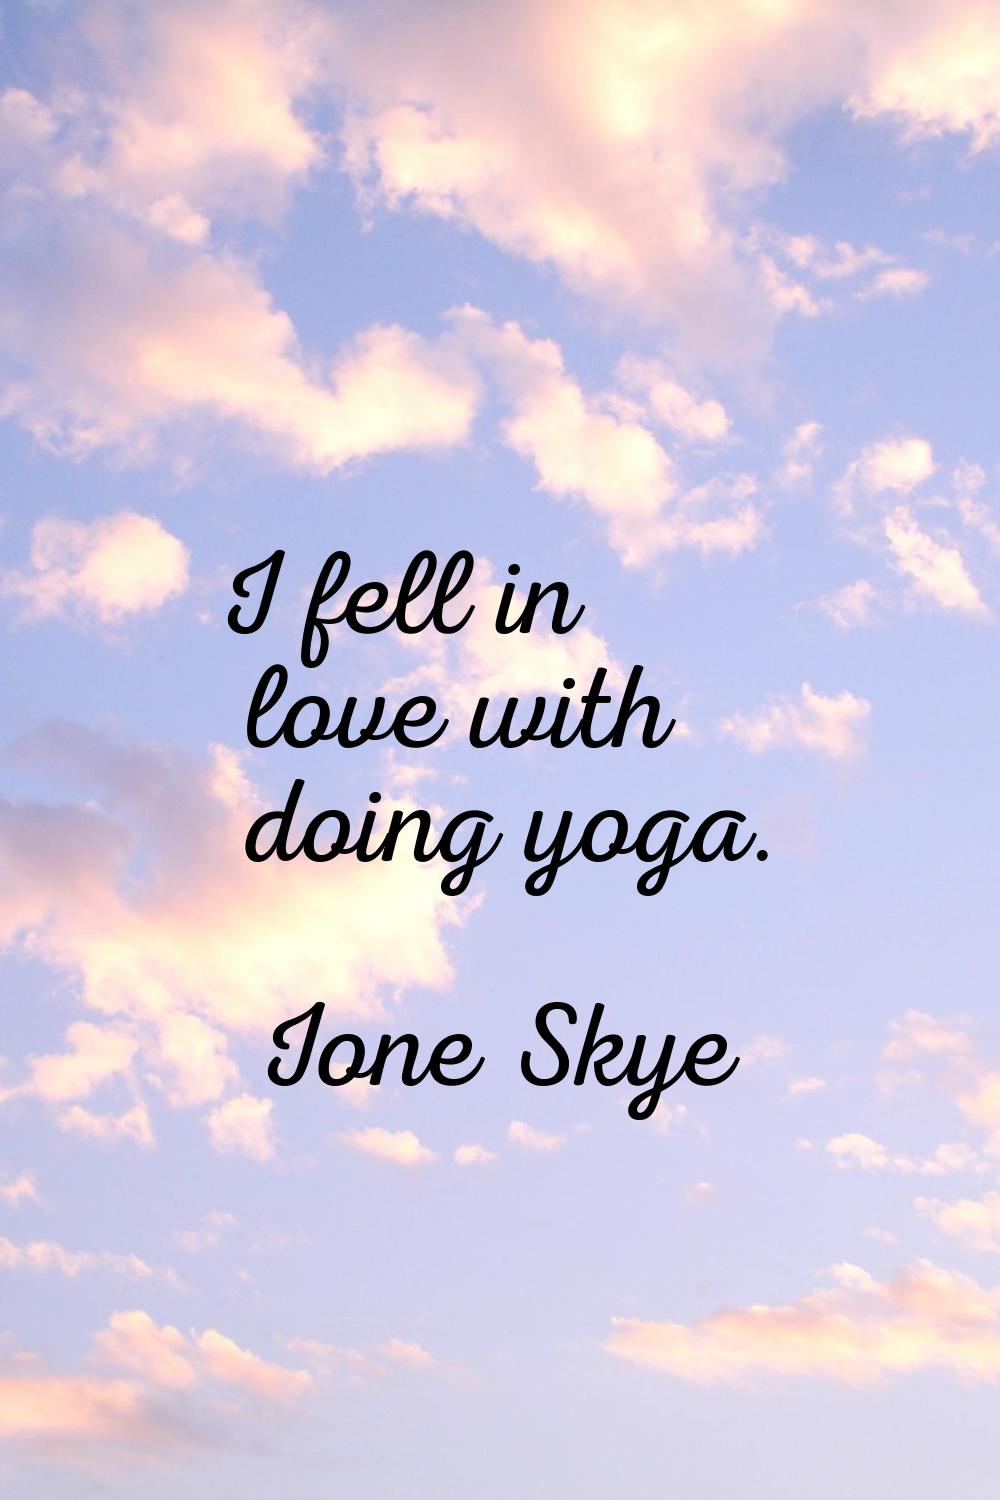 I fell in love with doing yoga.